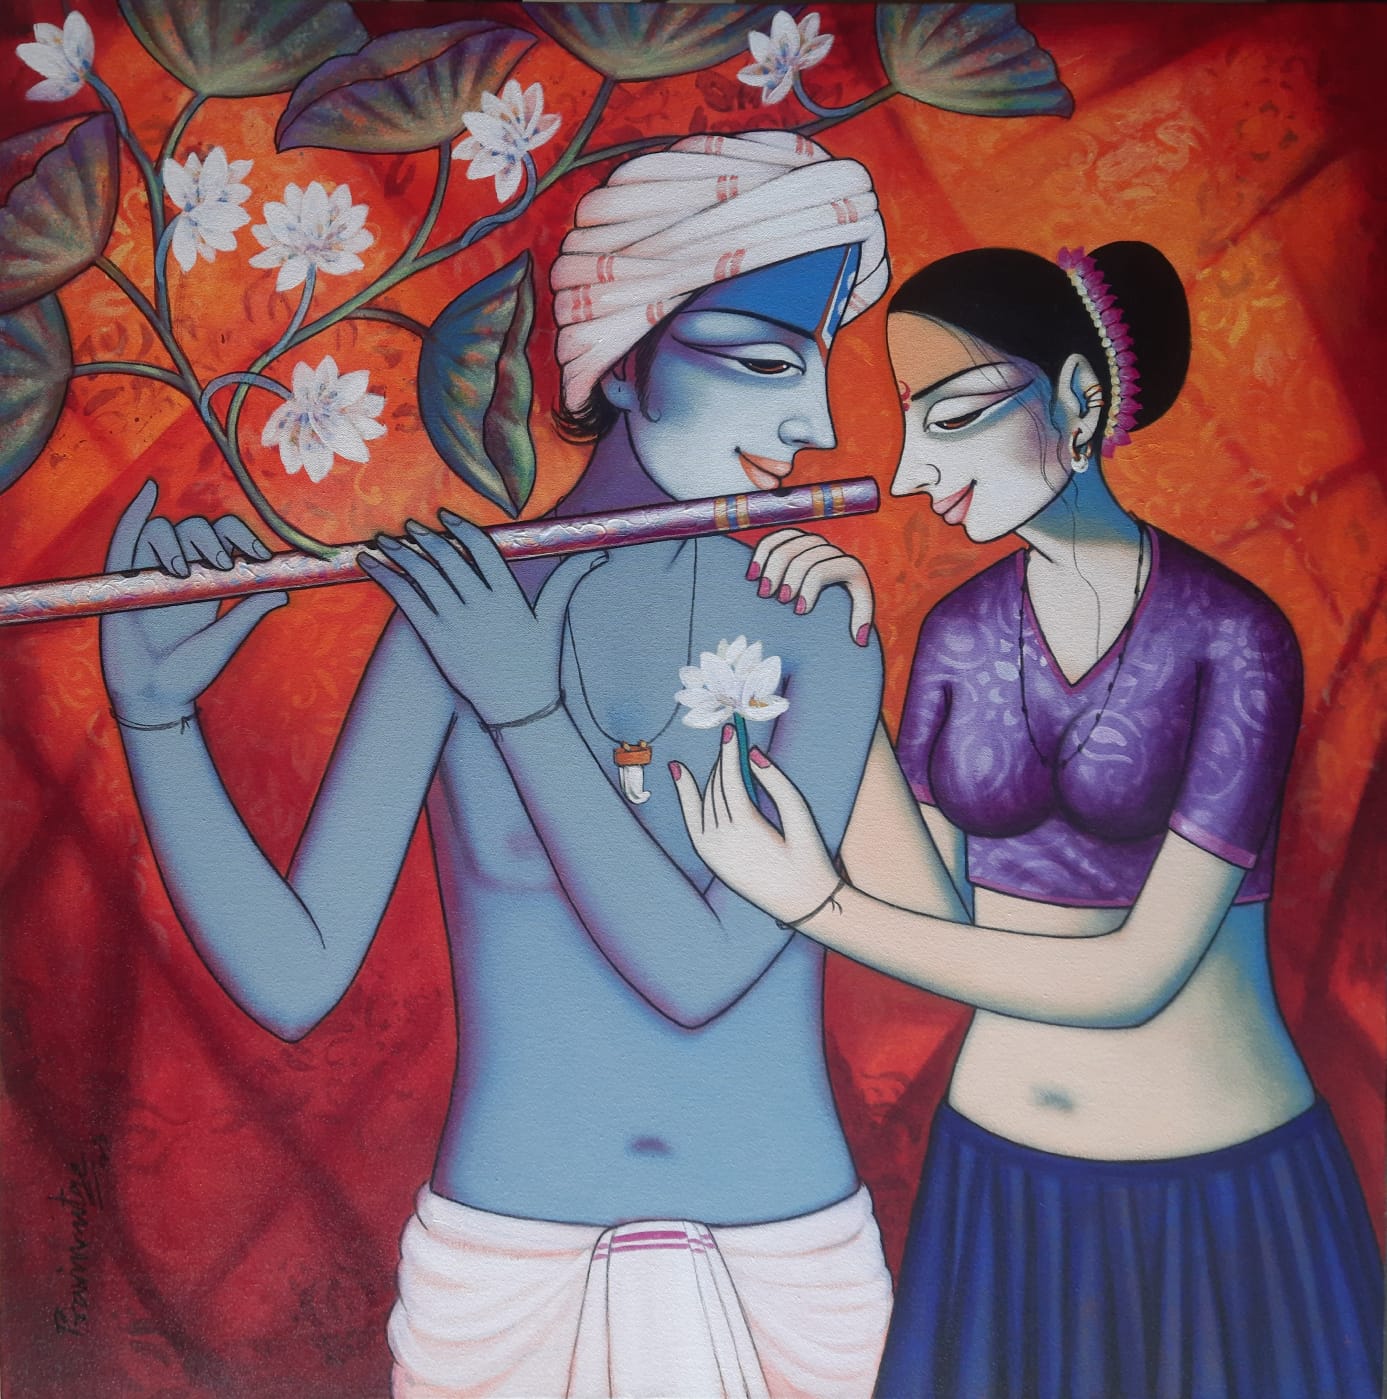 Figurative Painting with Acrylic on Canvas "Untitled" art by Pravin Utge